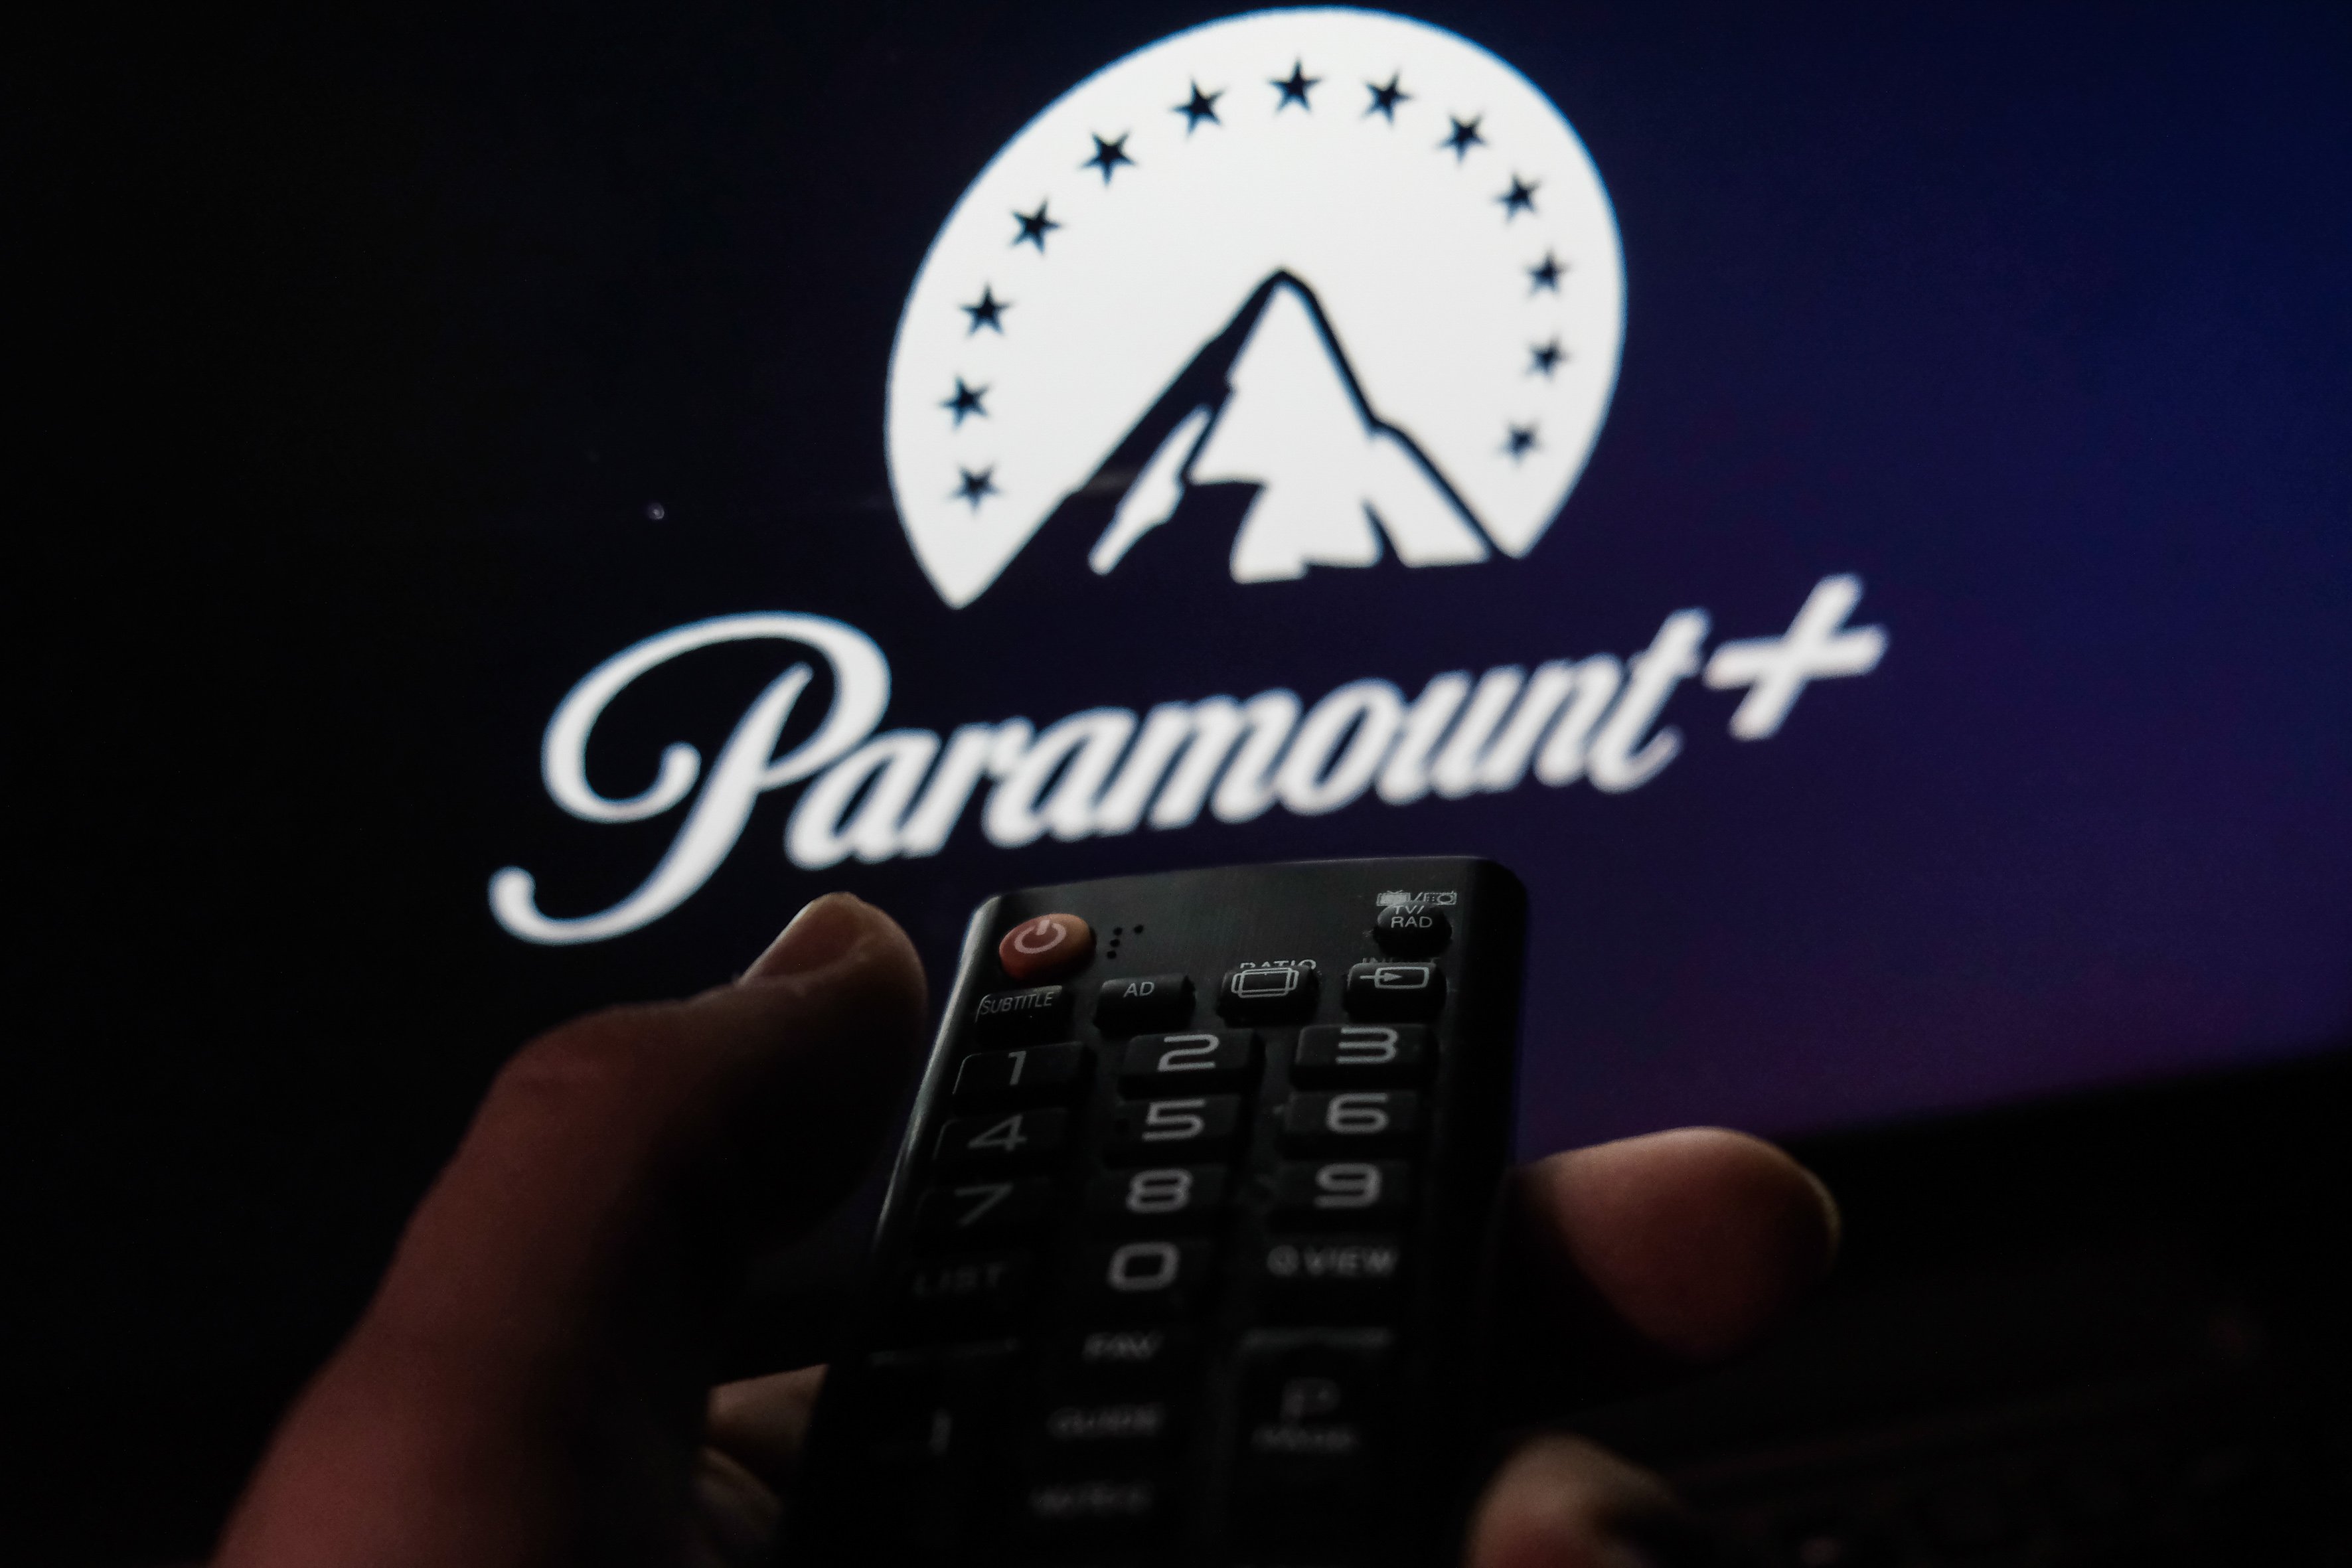 TV remote control is seen with Paramount+ logo displayed on a screen